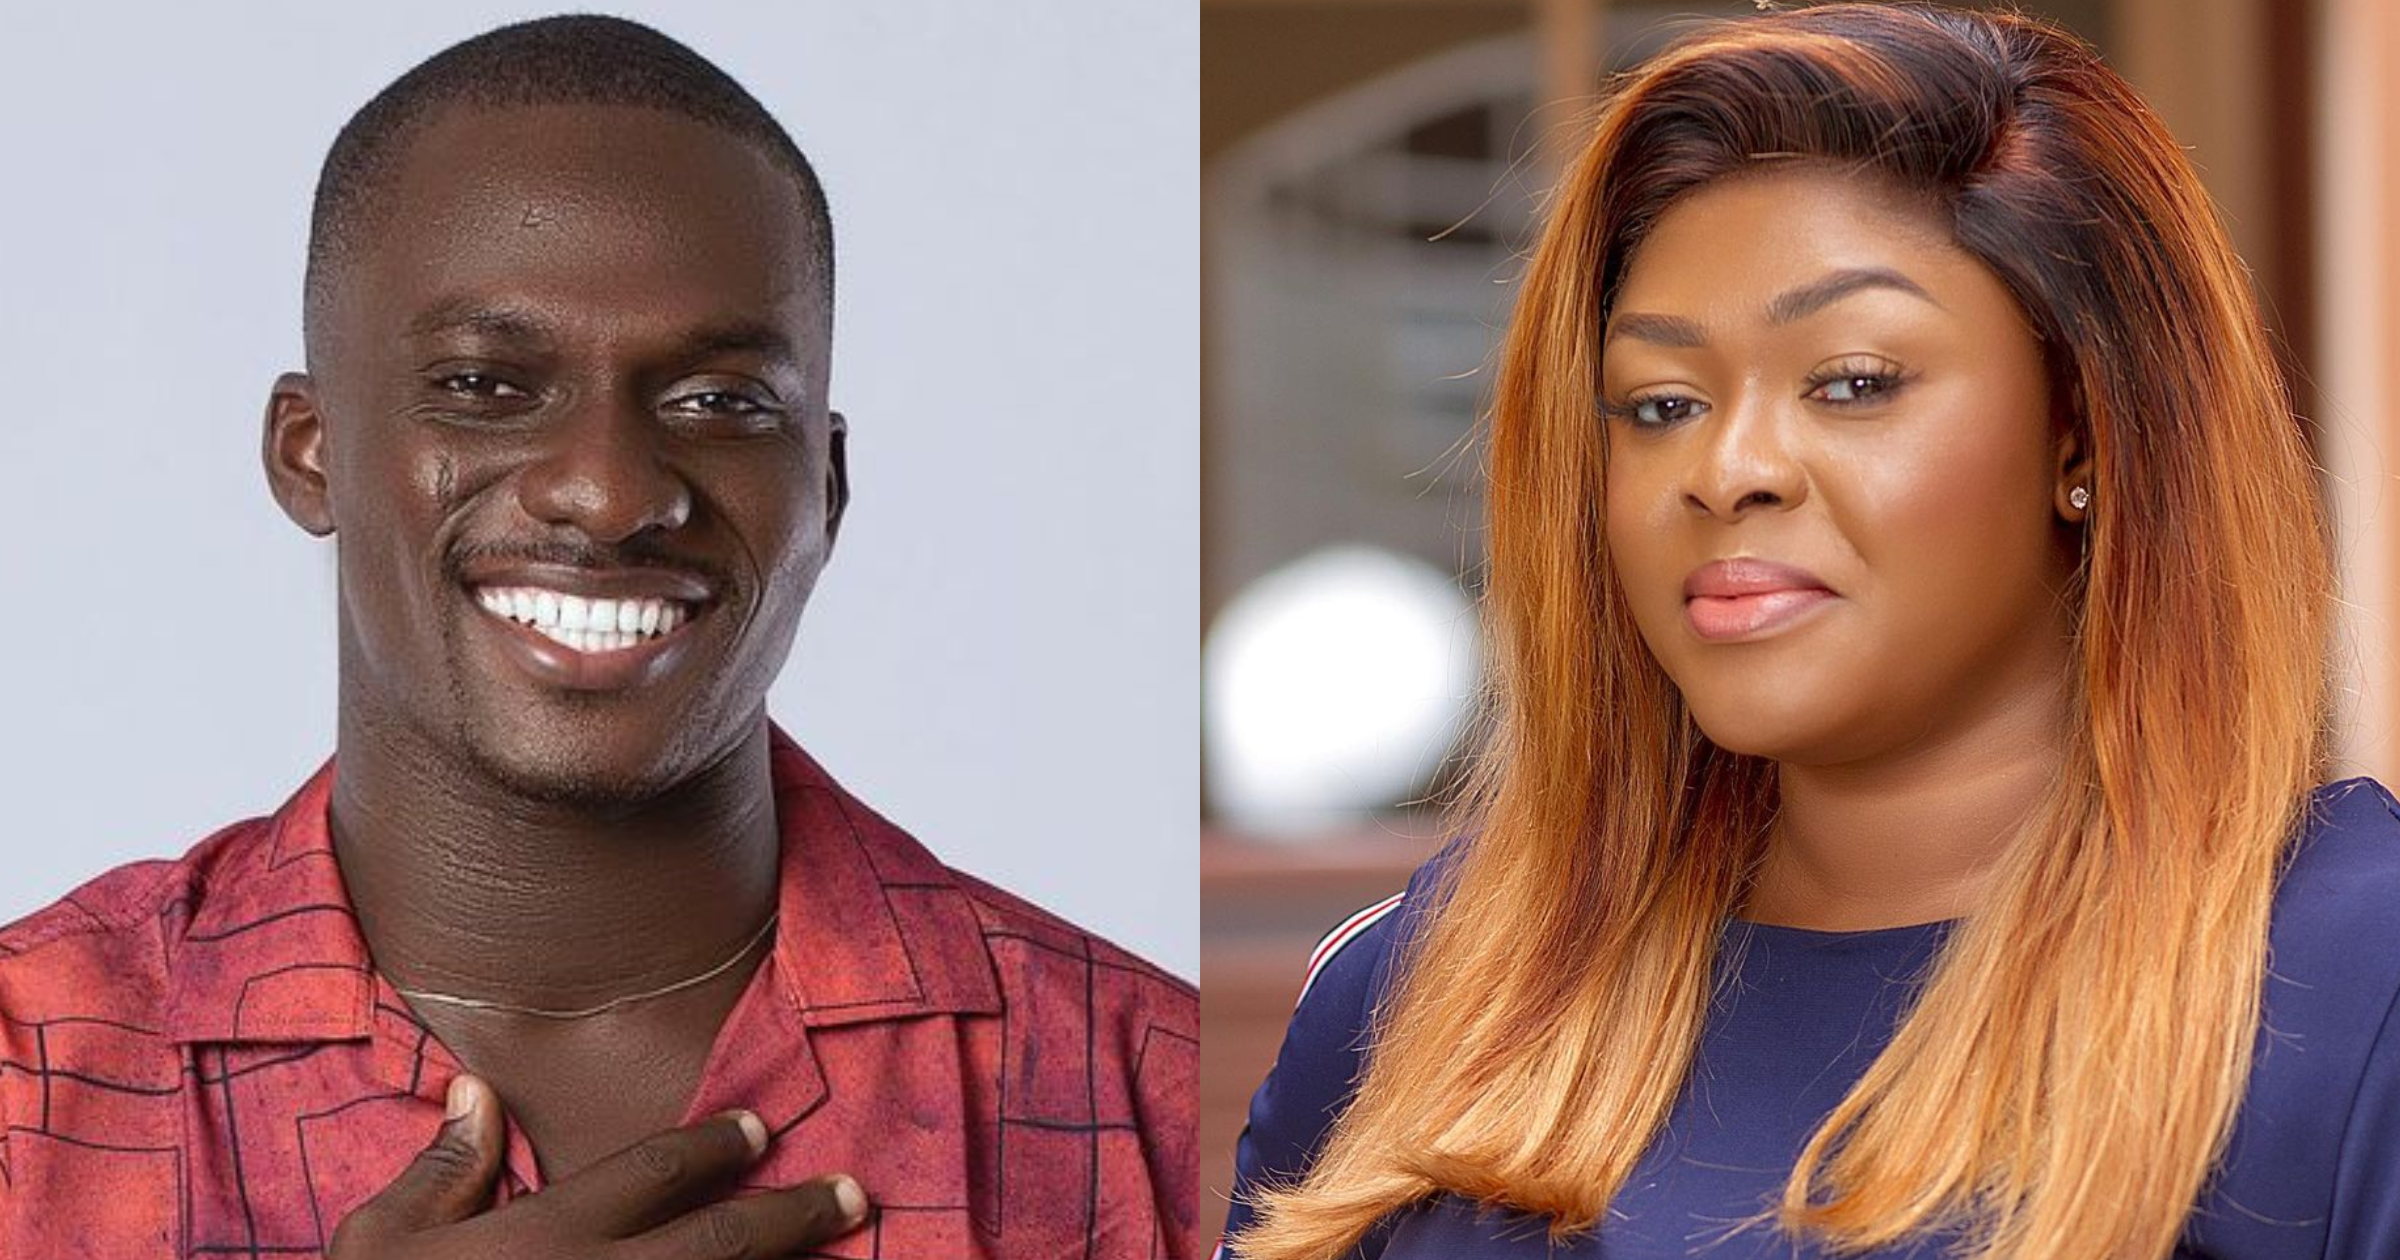 Trouble in paradise: Zionfelix's fiancee Minalyn unfollows him, deletes all his photos after a video of her rival's wedding ring went viral